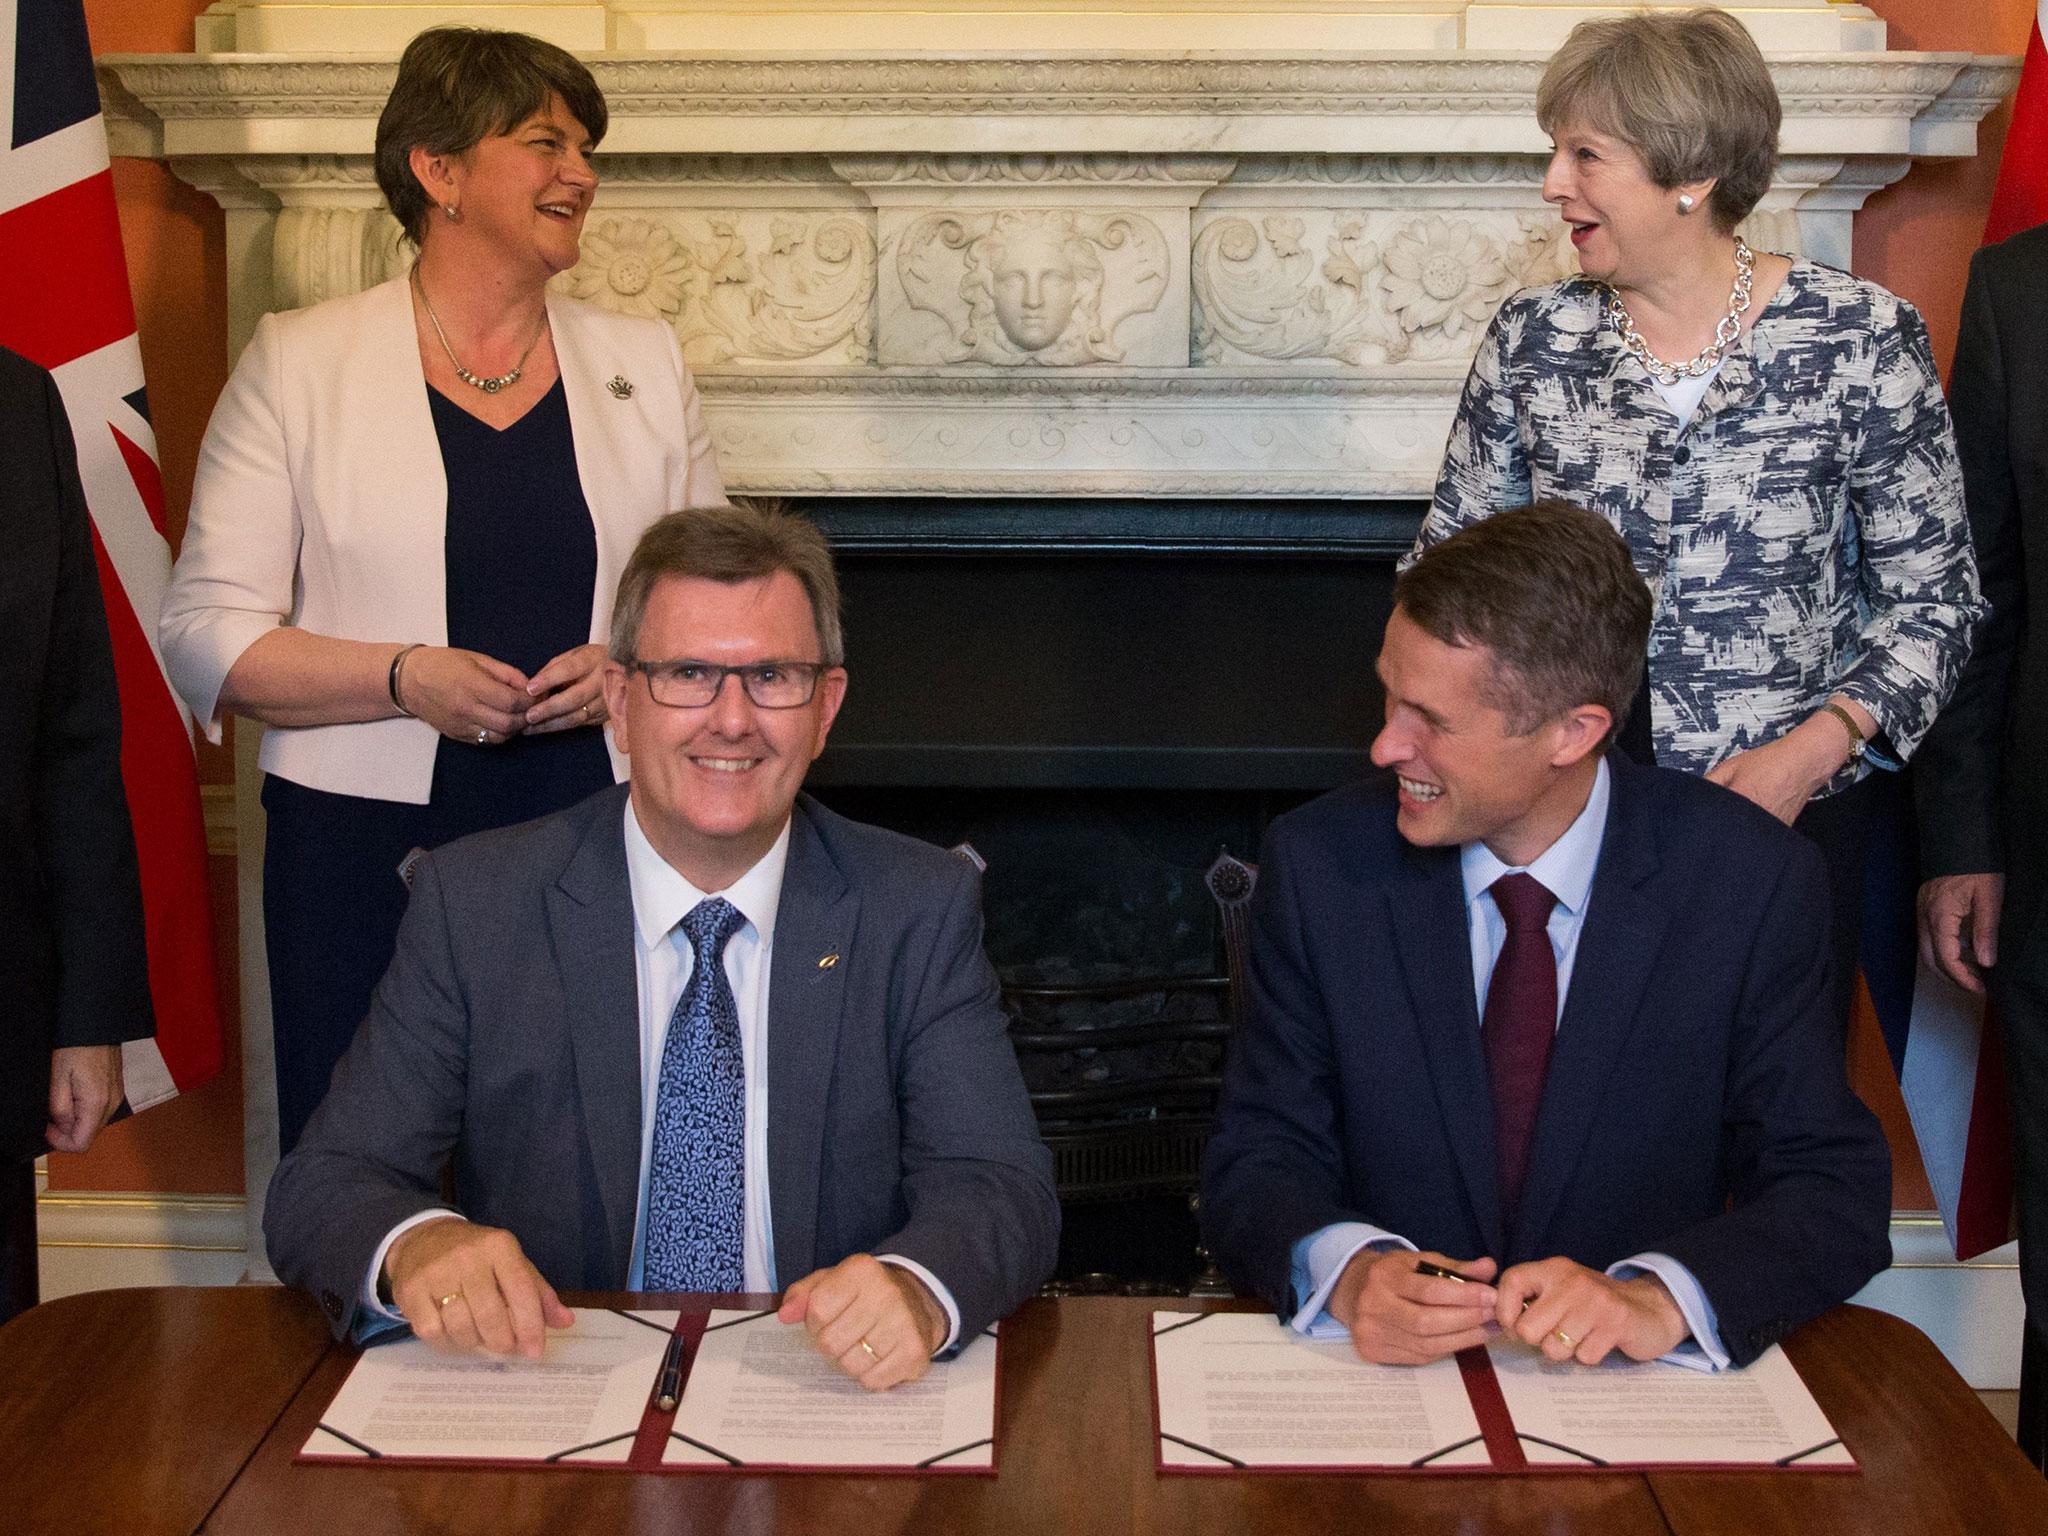 Theresa May will come to regret the DUP deal